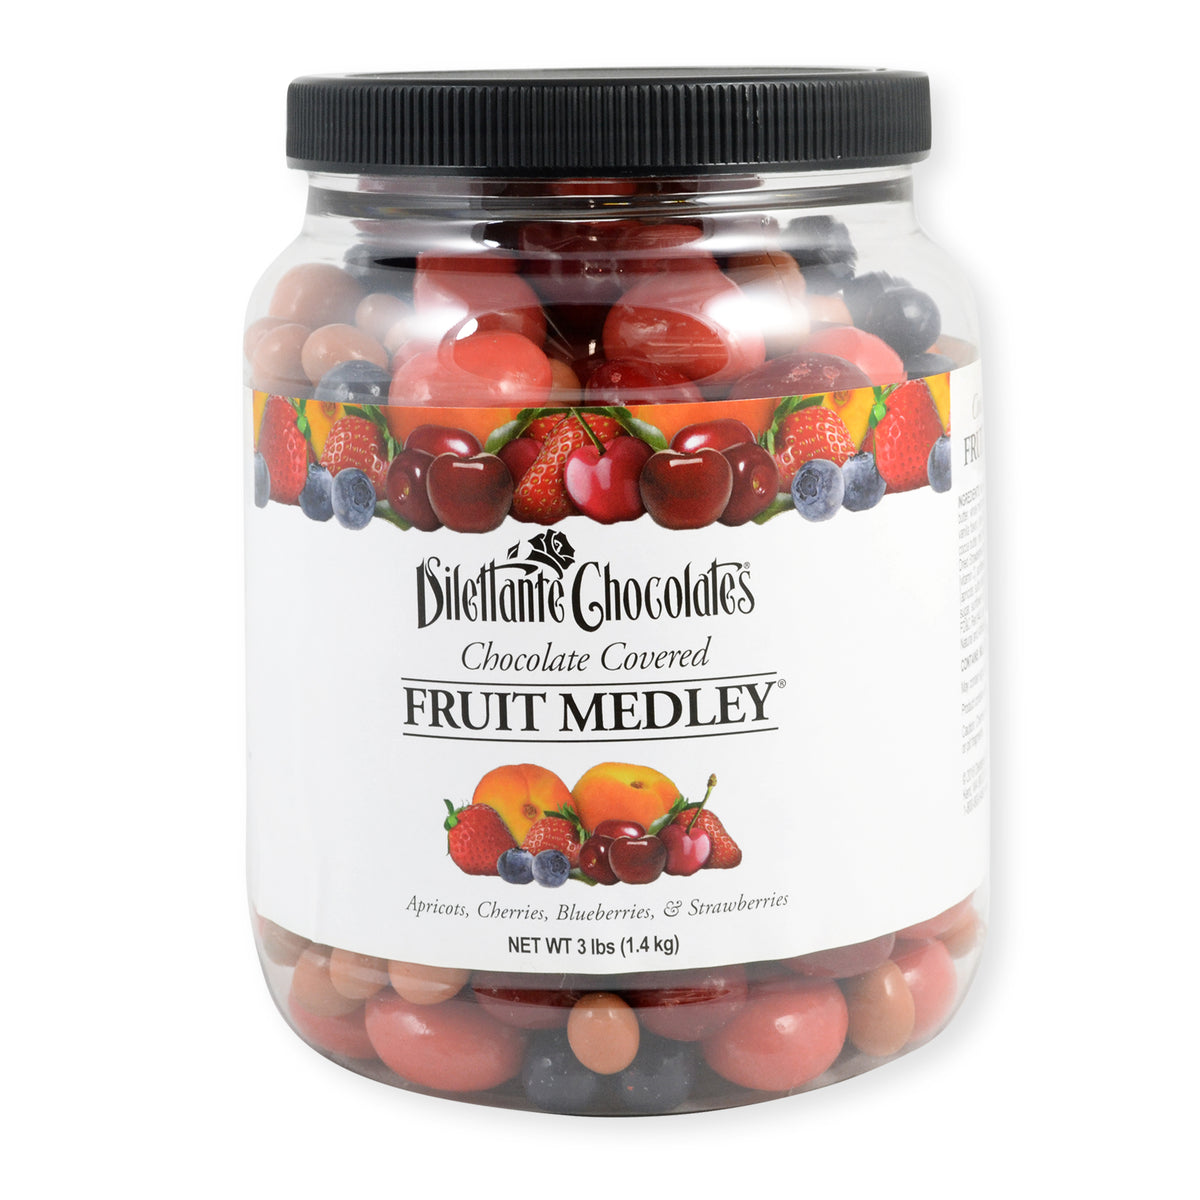 Classic Chocolate Covered Fruit Medley - 3 lb